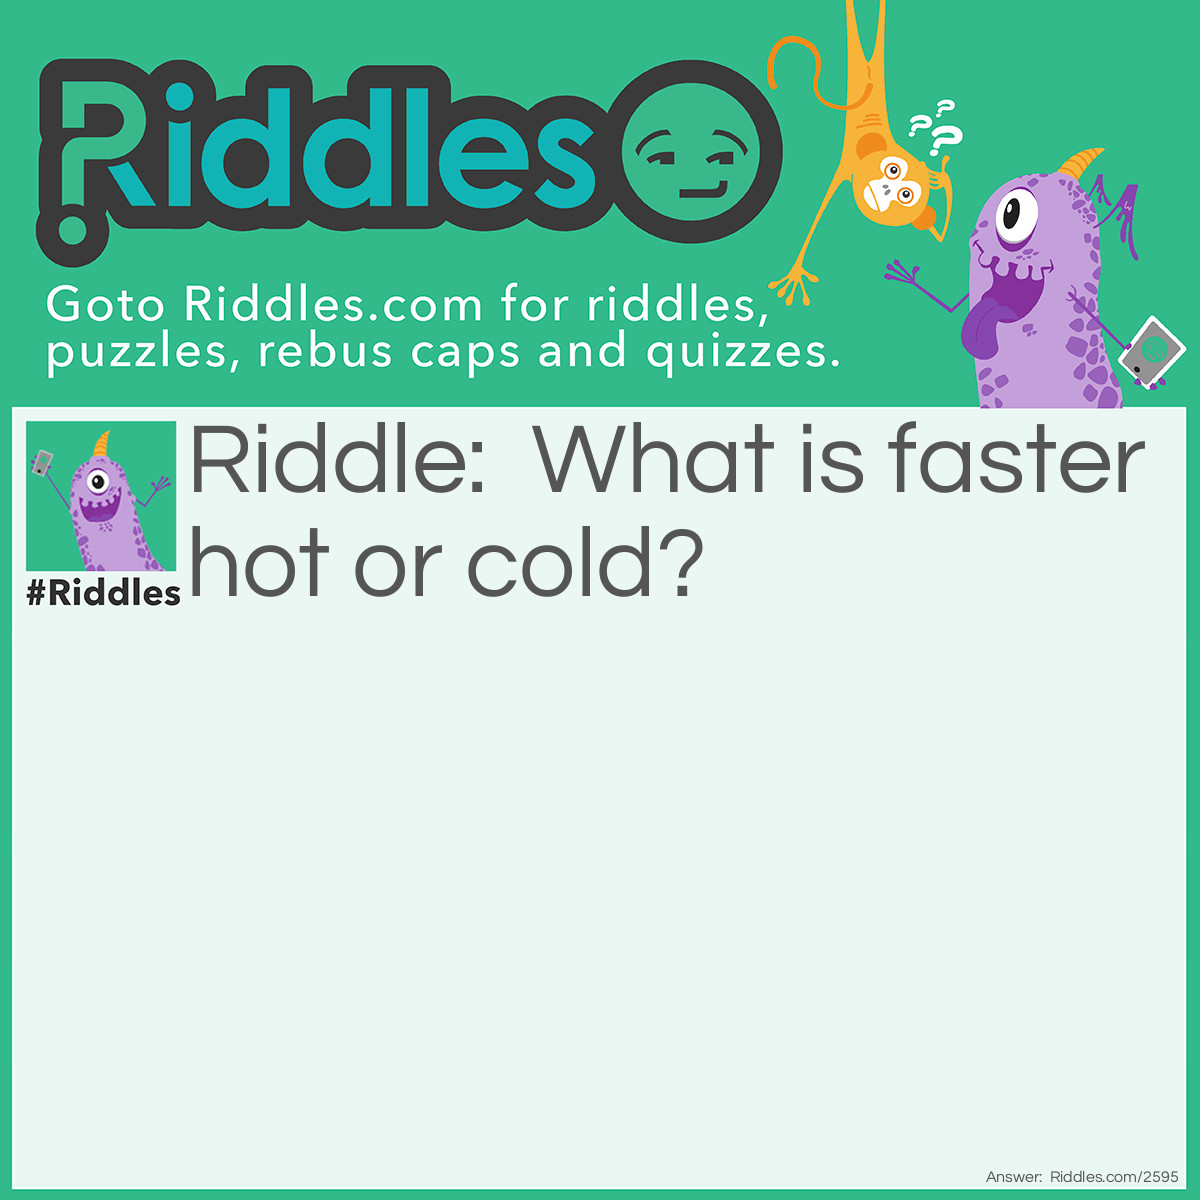 Riddle: What is faster hot or cold? Answer: Hot, you can easily catch a cold.